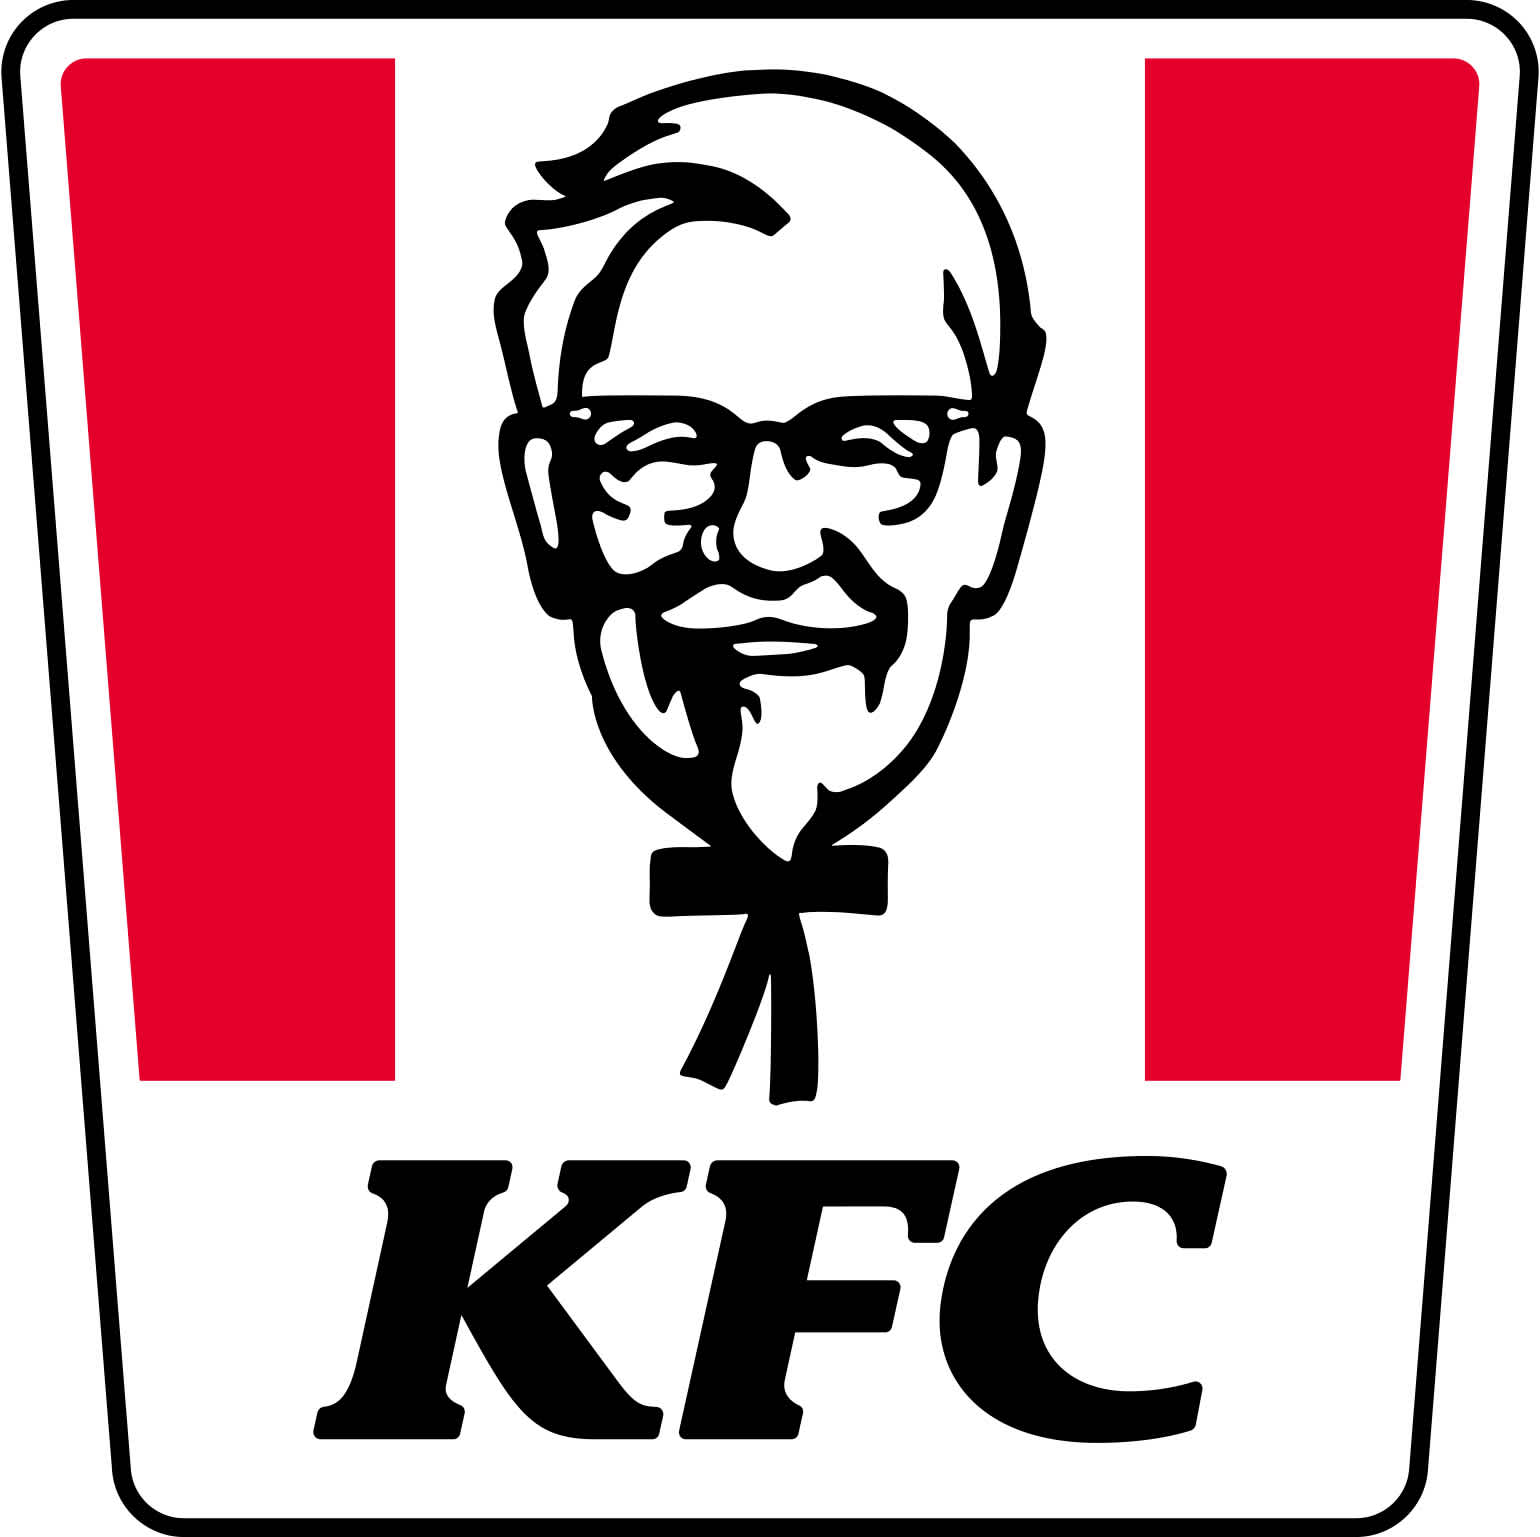 KFC - KENTUCKY FRIED CHICKEN OPENS IN CAMPANIA AND REACHES 40 RESTAURANTS IN ITALY